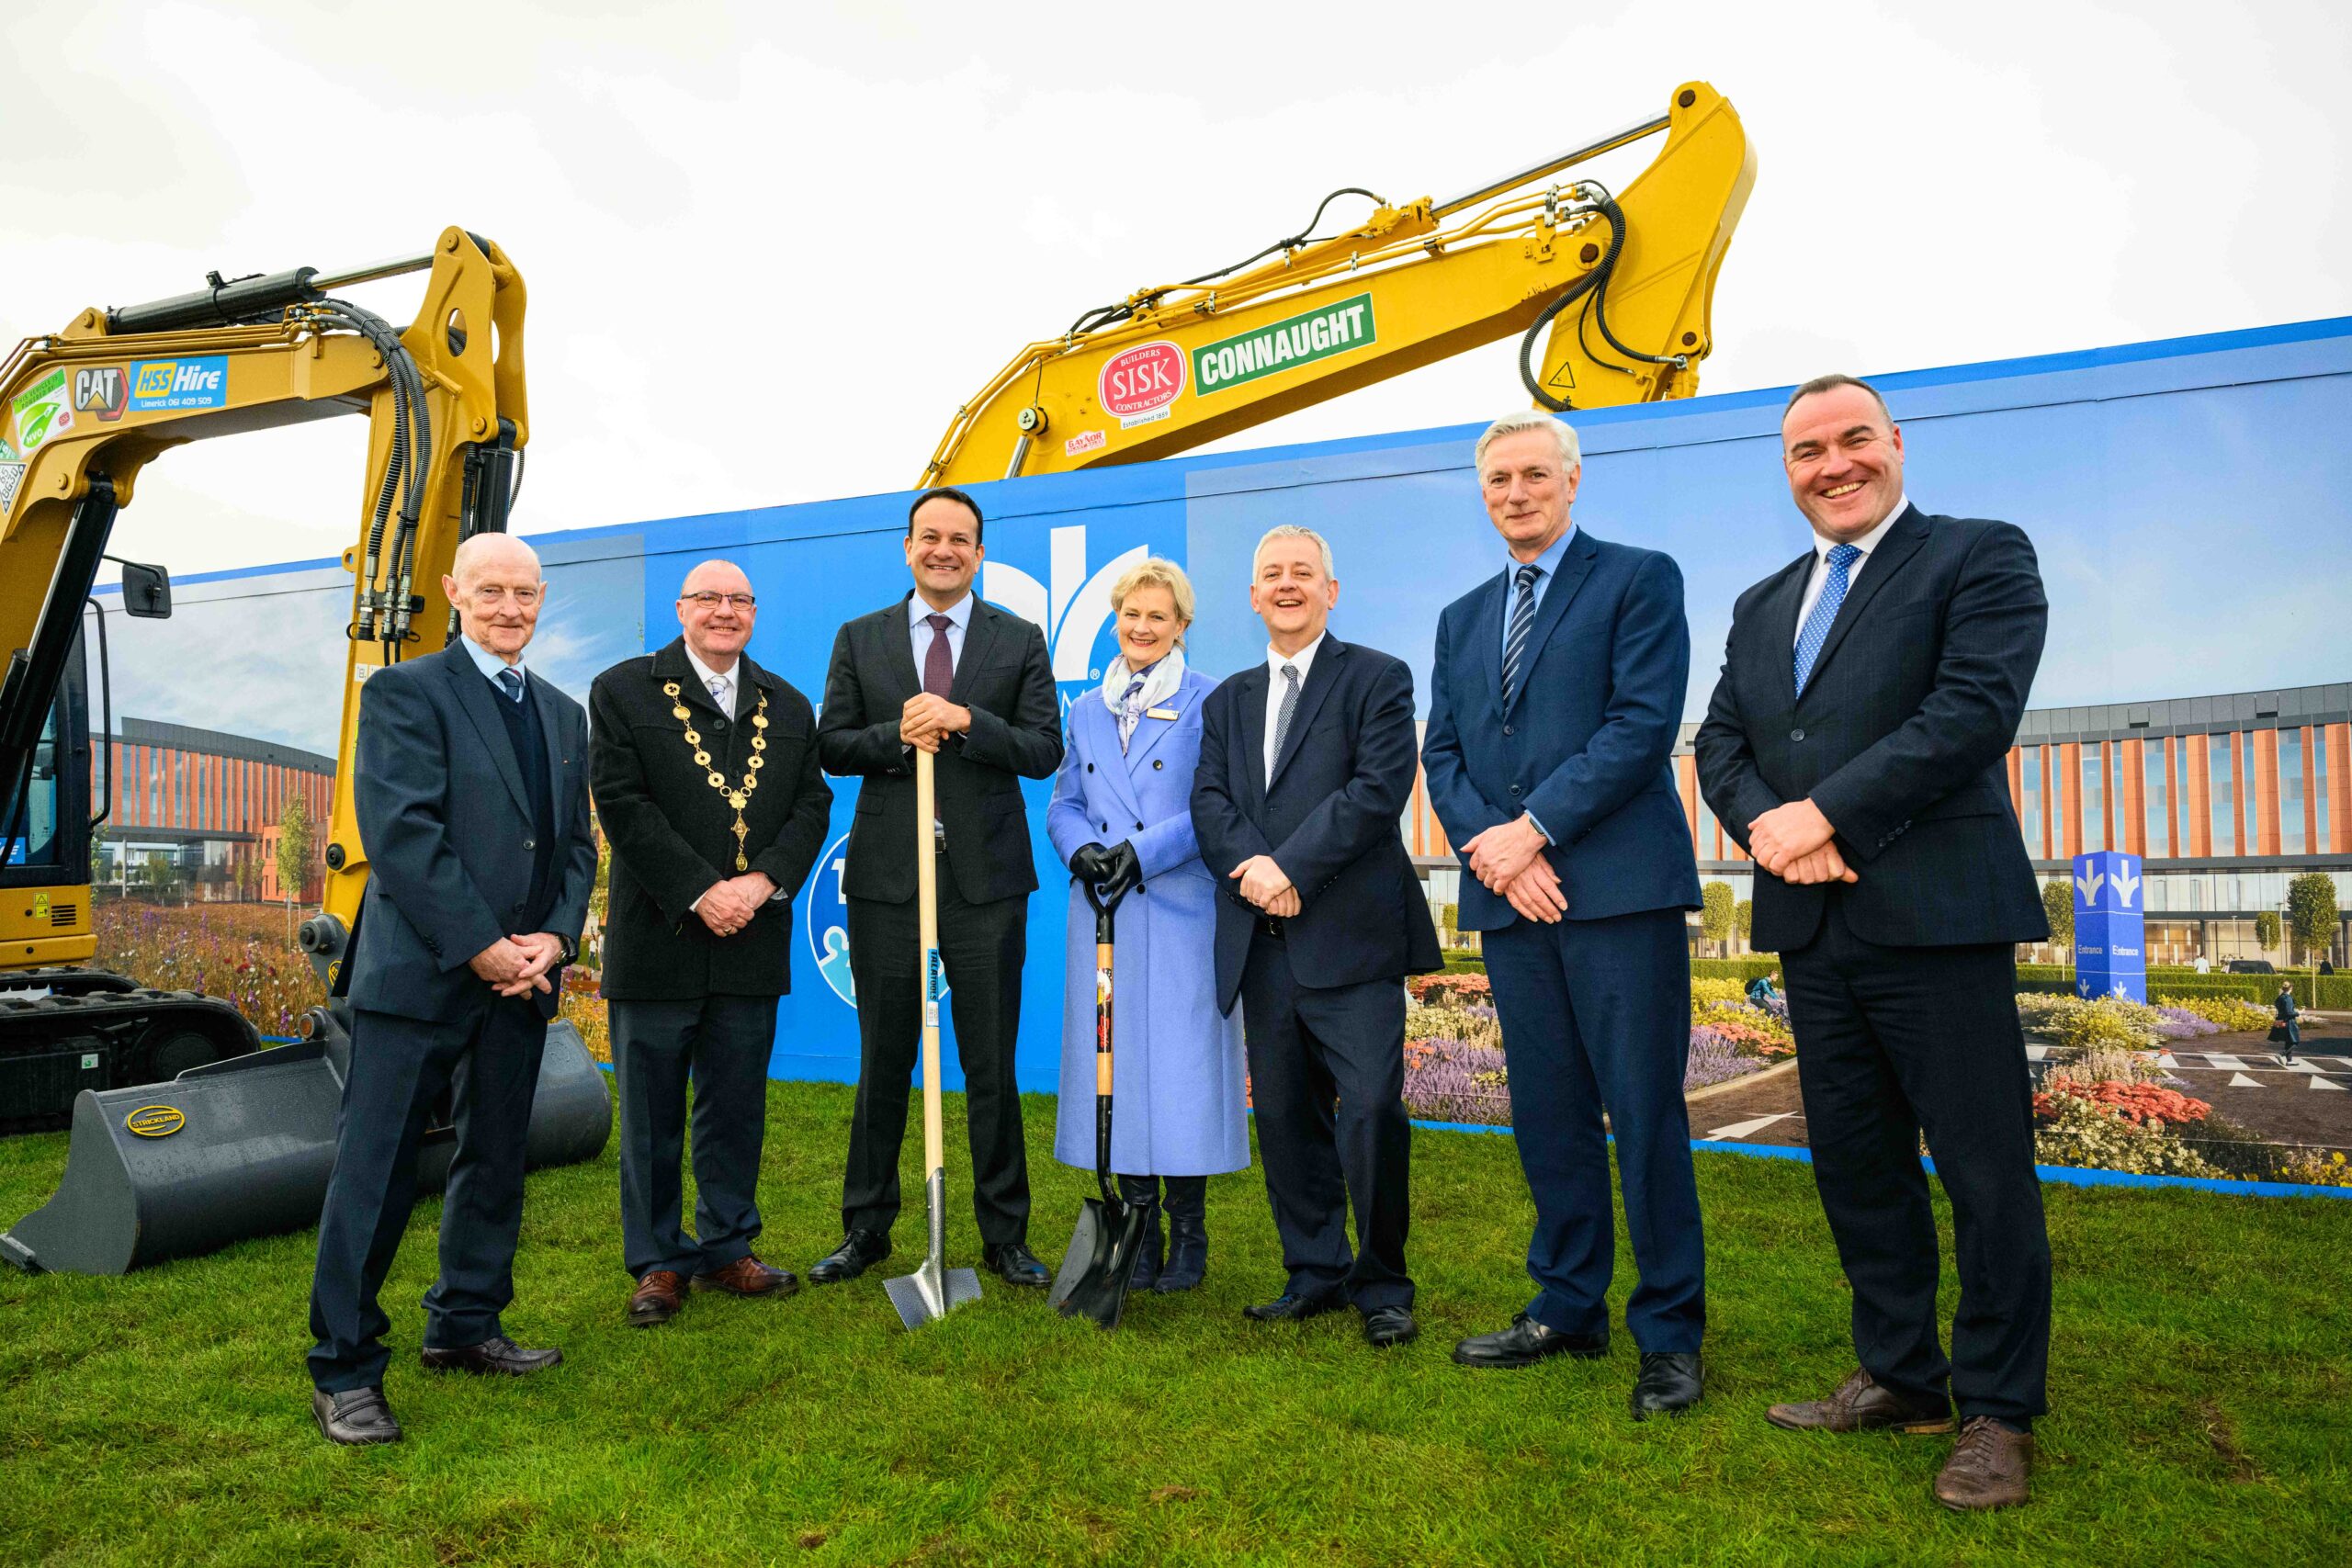 Taoiseach welcomes new €190 million Bon Secours Limerick hospital set to open in 2025